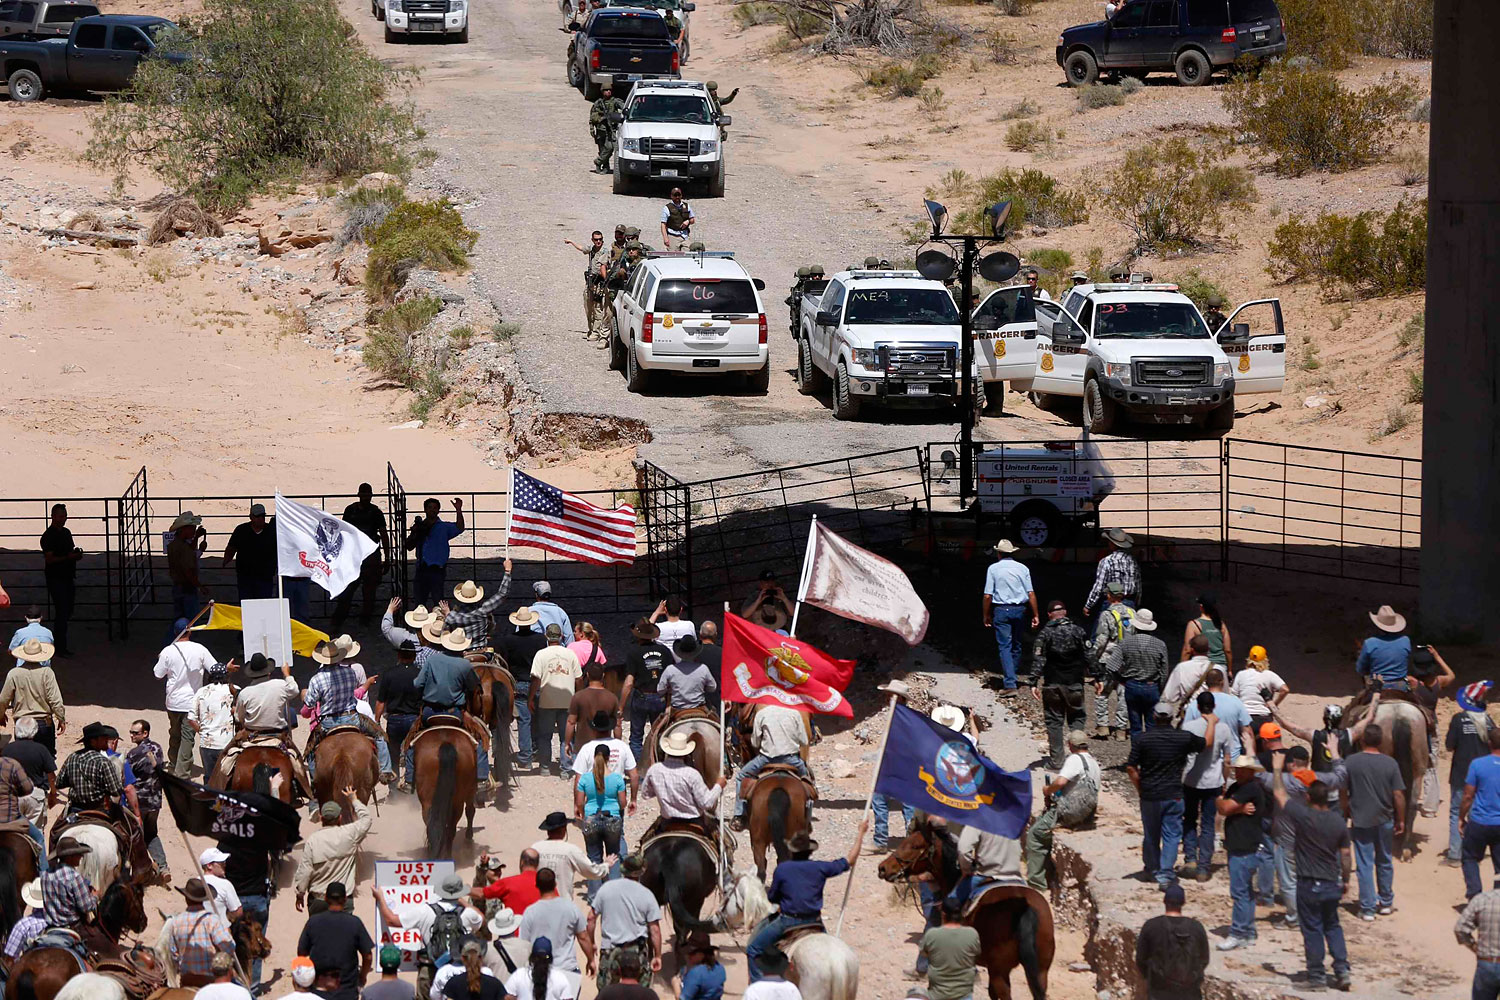 Protesters gathered at the Bureau of Land Management's base camp, where cattle seized from rancher Cliven Bundy was being held, near Bunkerville, Nevada, April 12, 2014. (Jim Urquhart—Reuters)